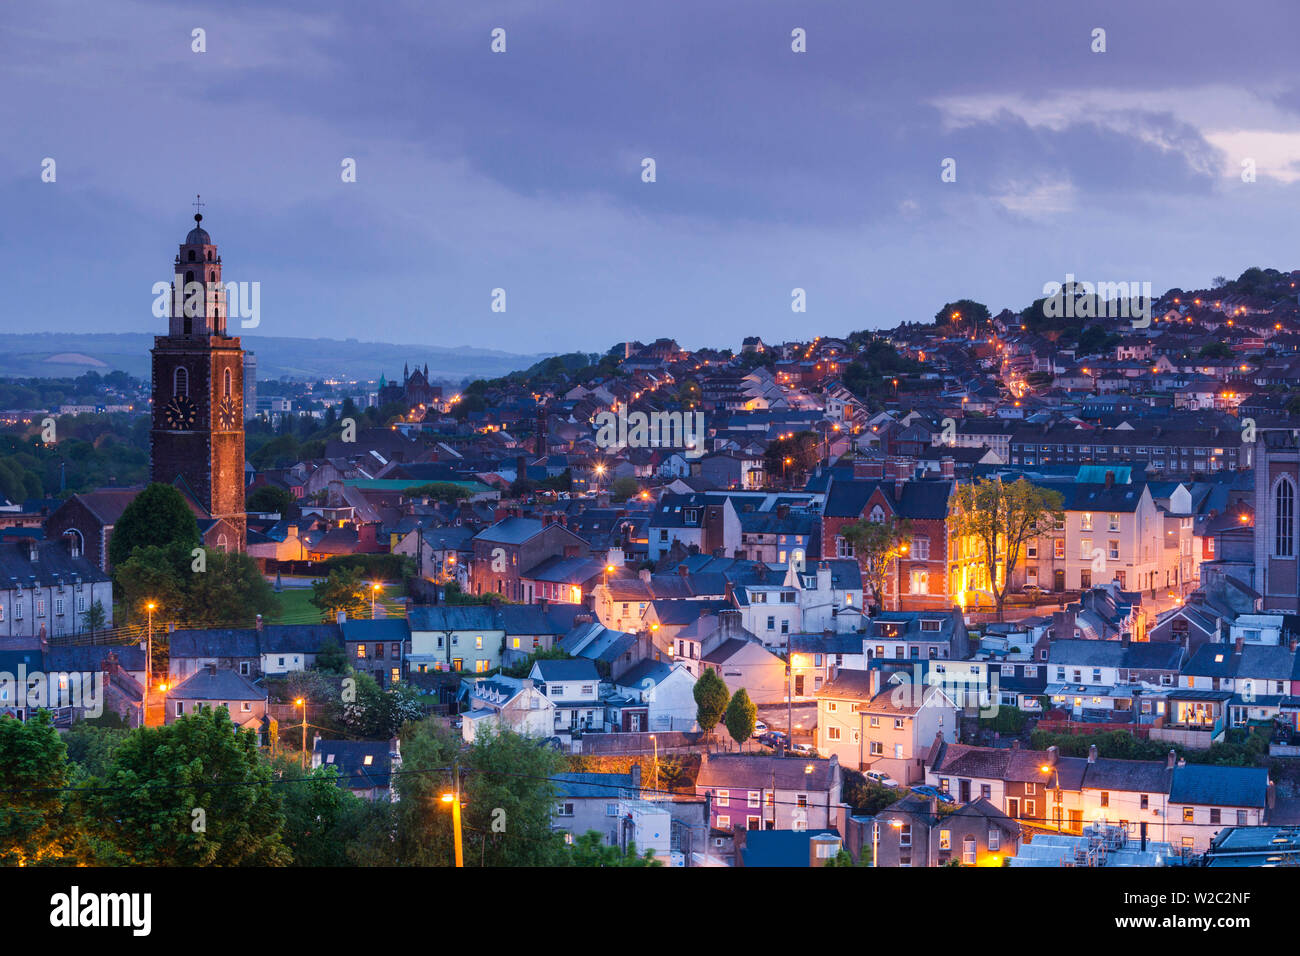 Ireland, County Cork, Cork City, St. Anne's Church, elevated view, dusk Stock Photo